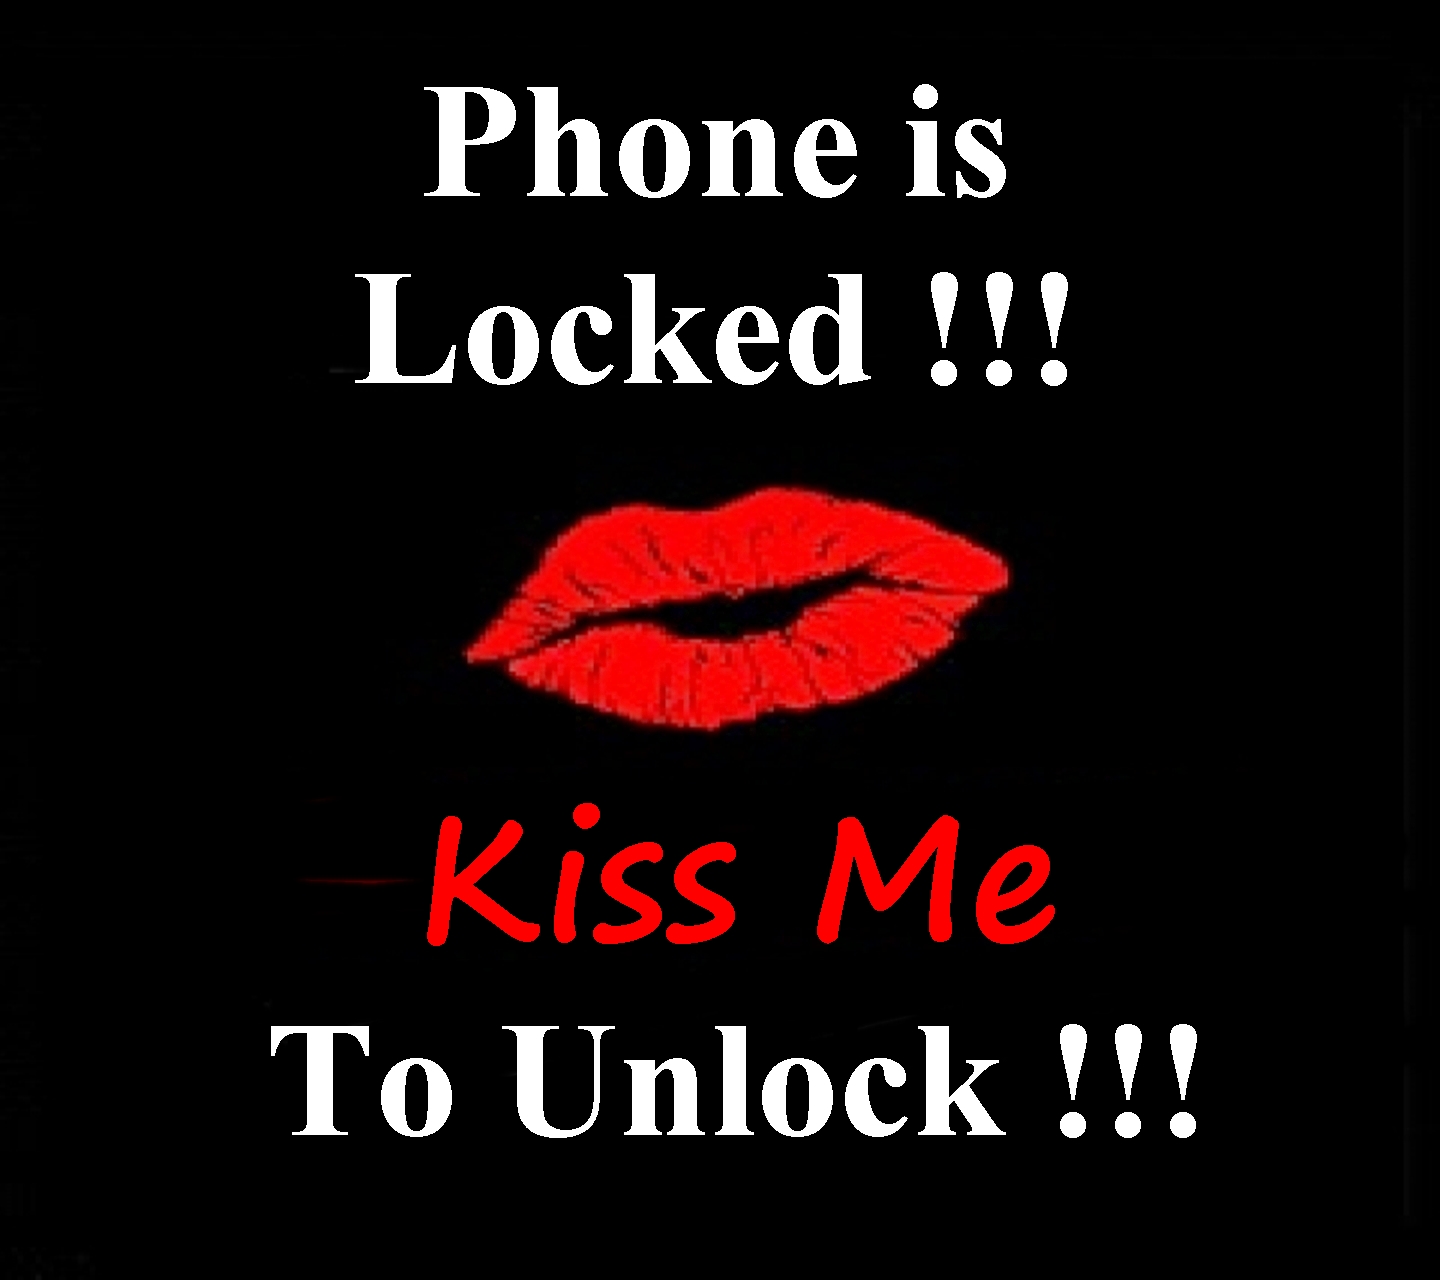 Download Kiss Me To Unlock 1440 X 1280 Wallpapers - Kiss Me To Unlock Wallpaper Hd - HD Wallpaper 